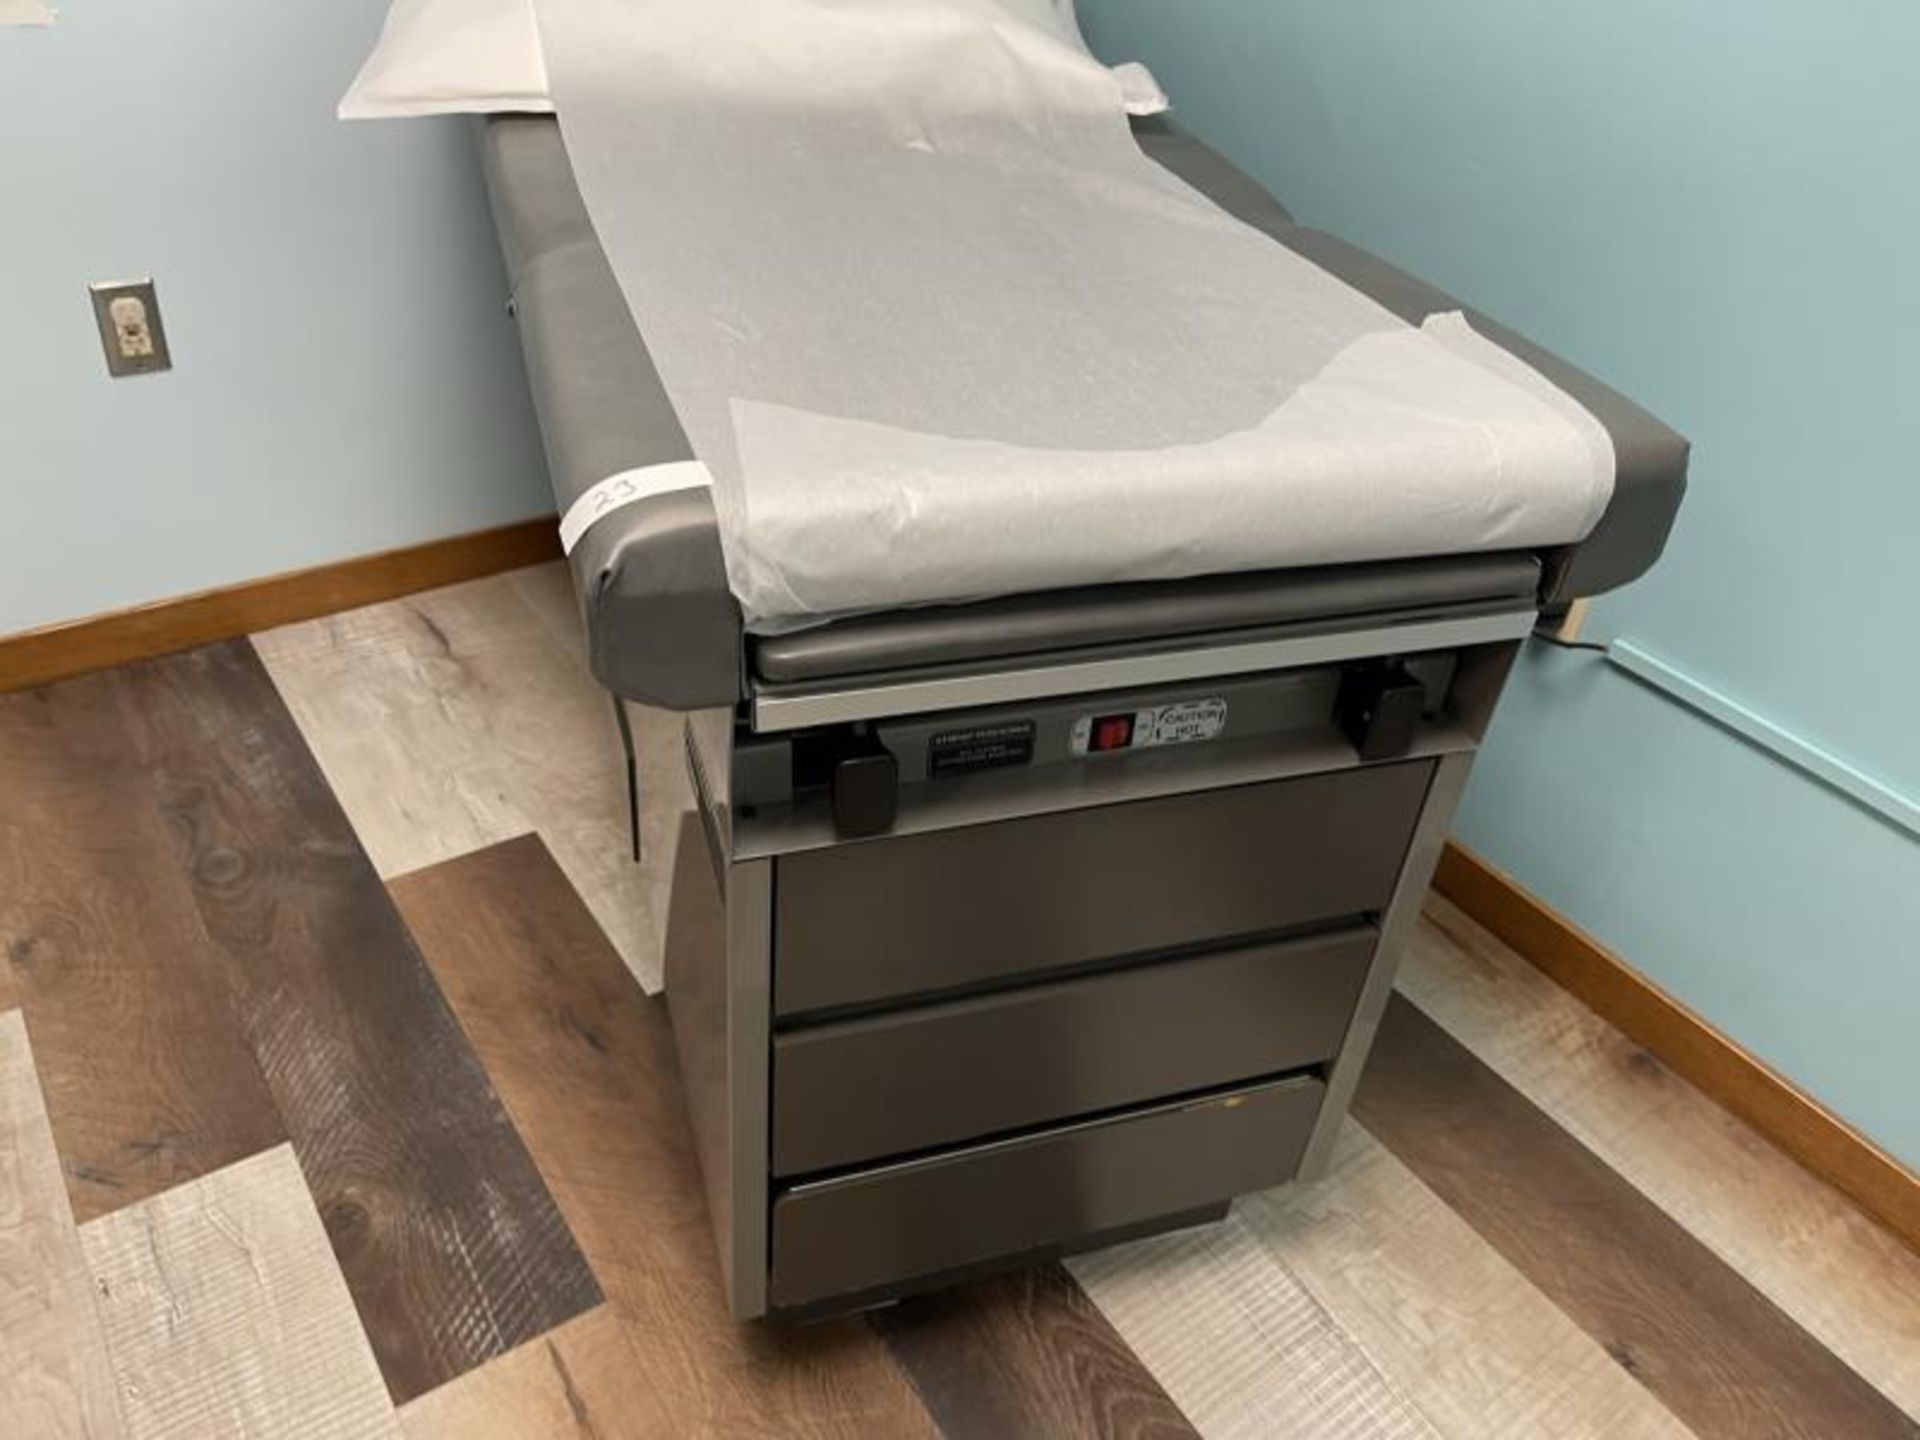 Ritter 104 Exam Table - Image 2 of 6